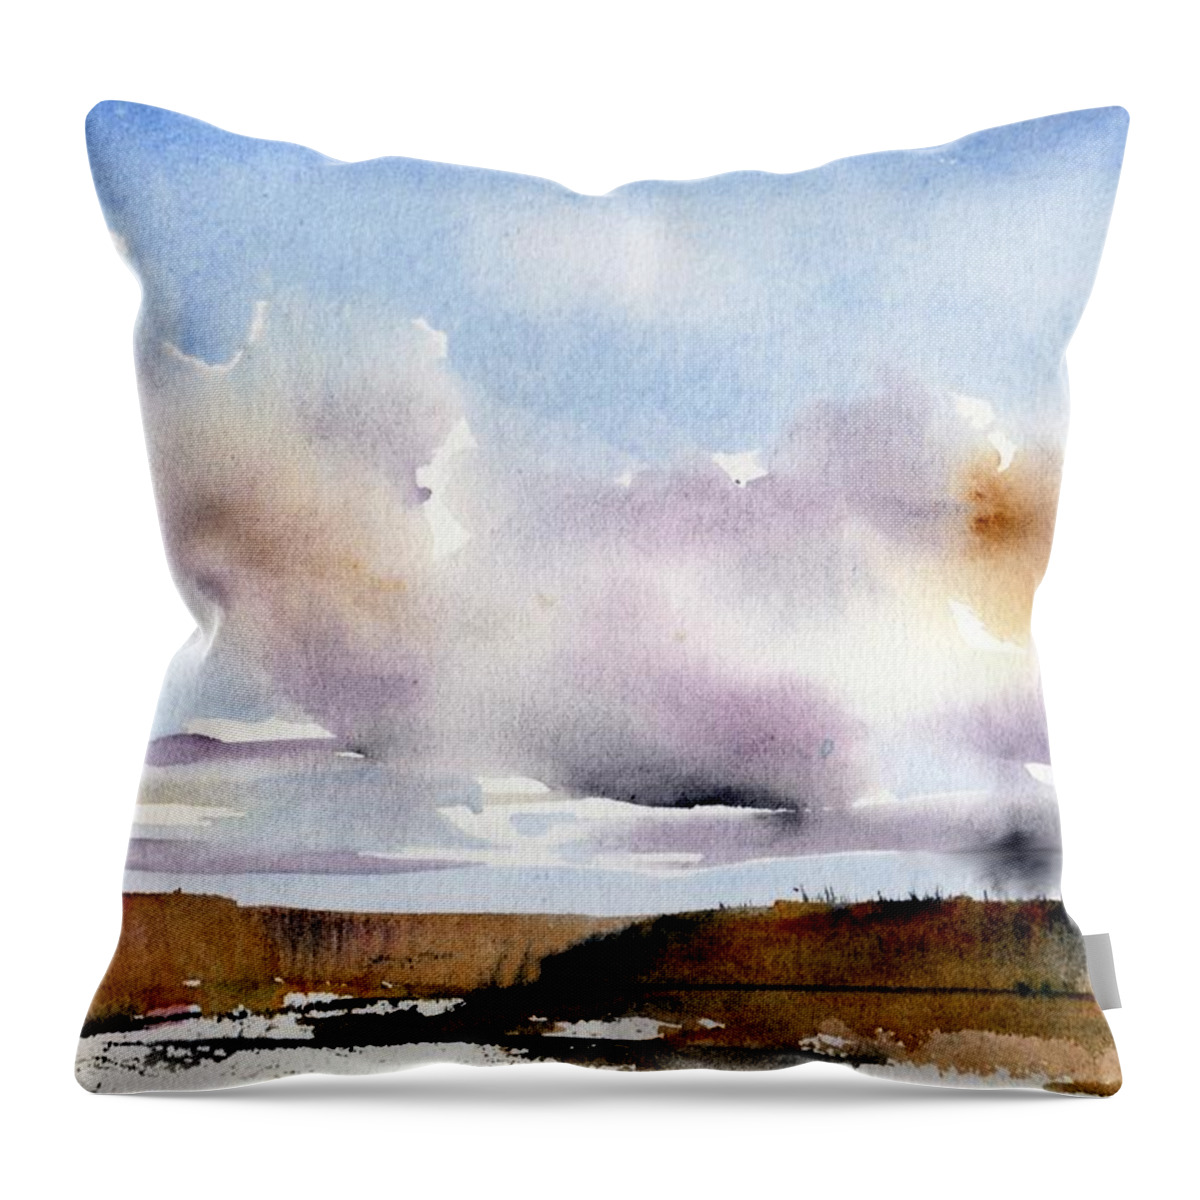 Storm Throw Pillow featuring the painting Desert Storm by Anne Duke